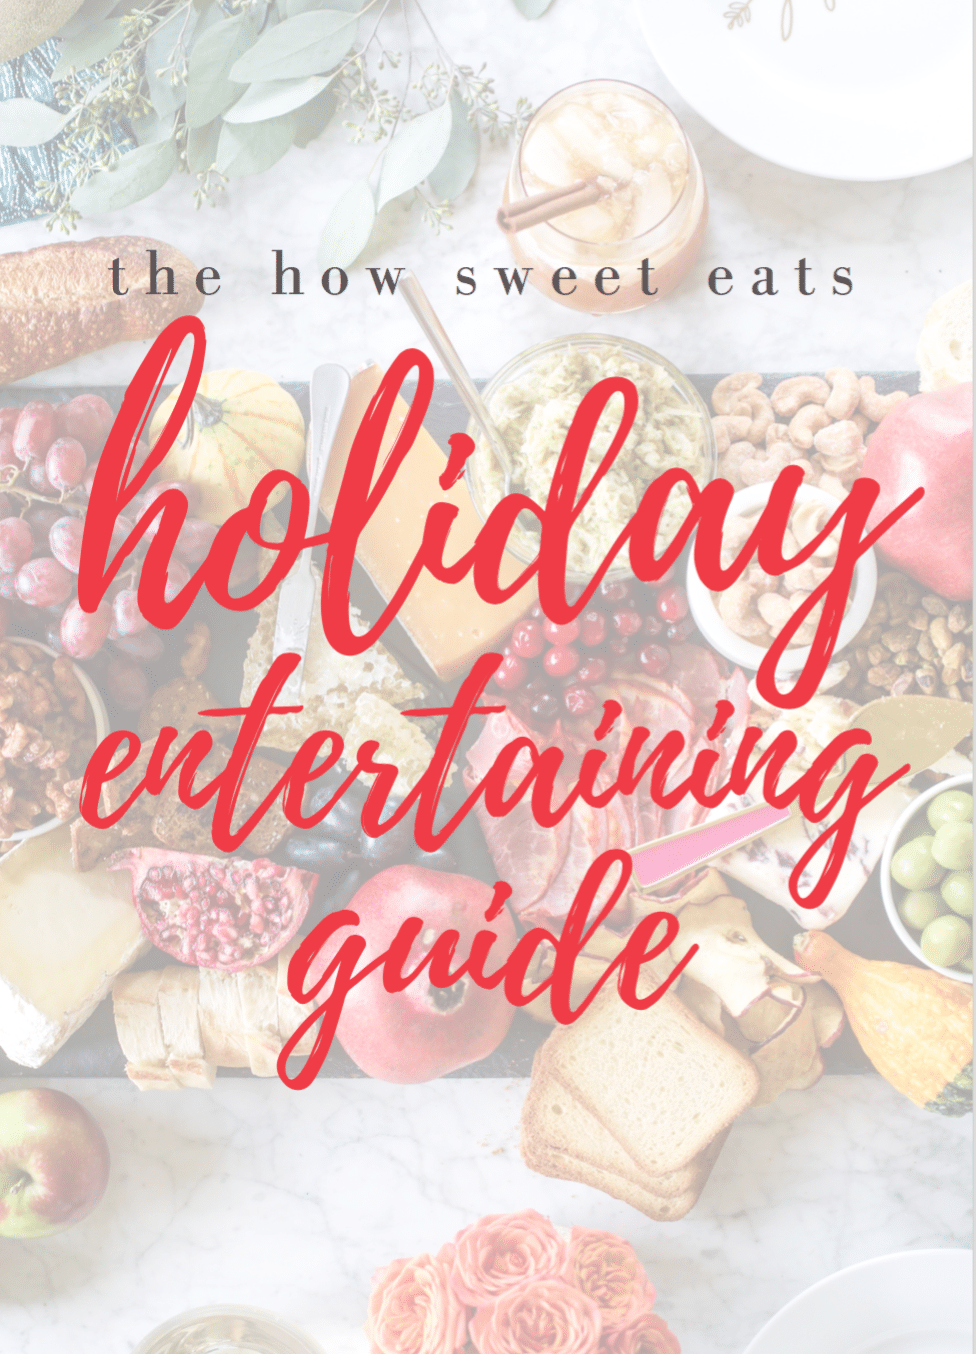 This is my go-to holiday entertaining guide for the season! 16 brand new exclusive recipes, all of my tips and tricks for hosting during the holidays along with my entertaining cheat sheet to make the season so much fun! I howsweeteats.com